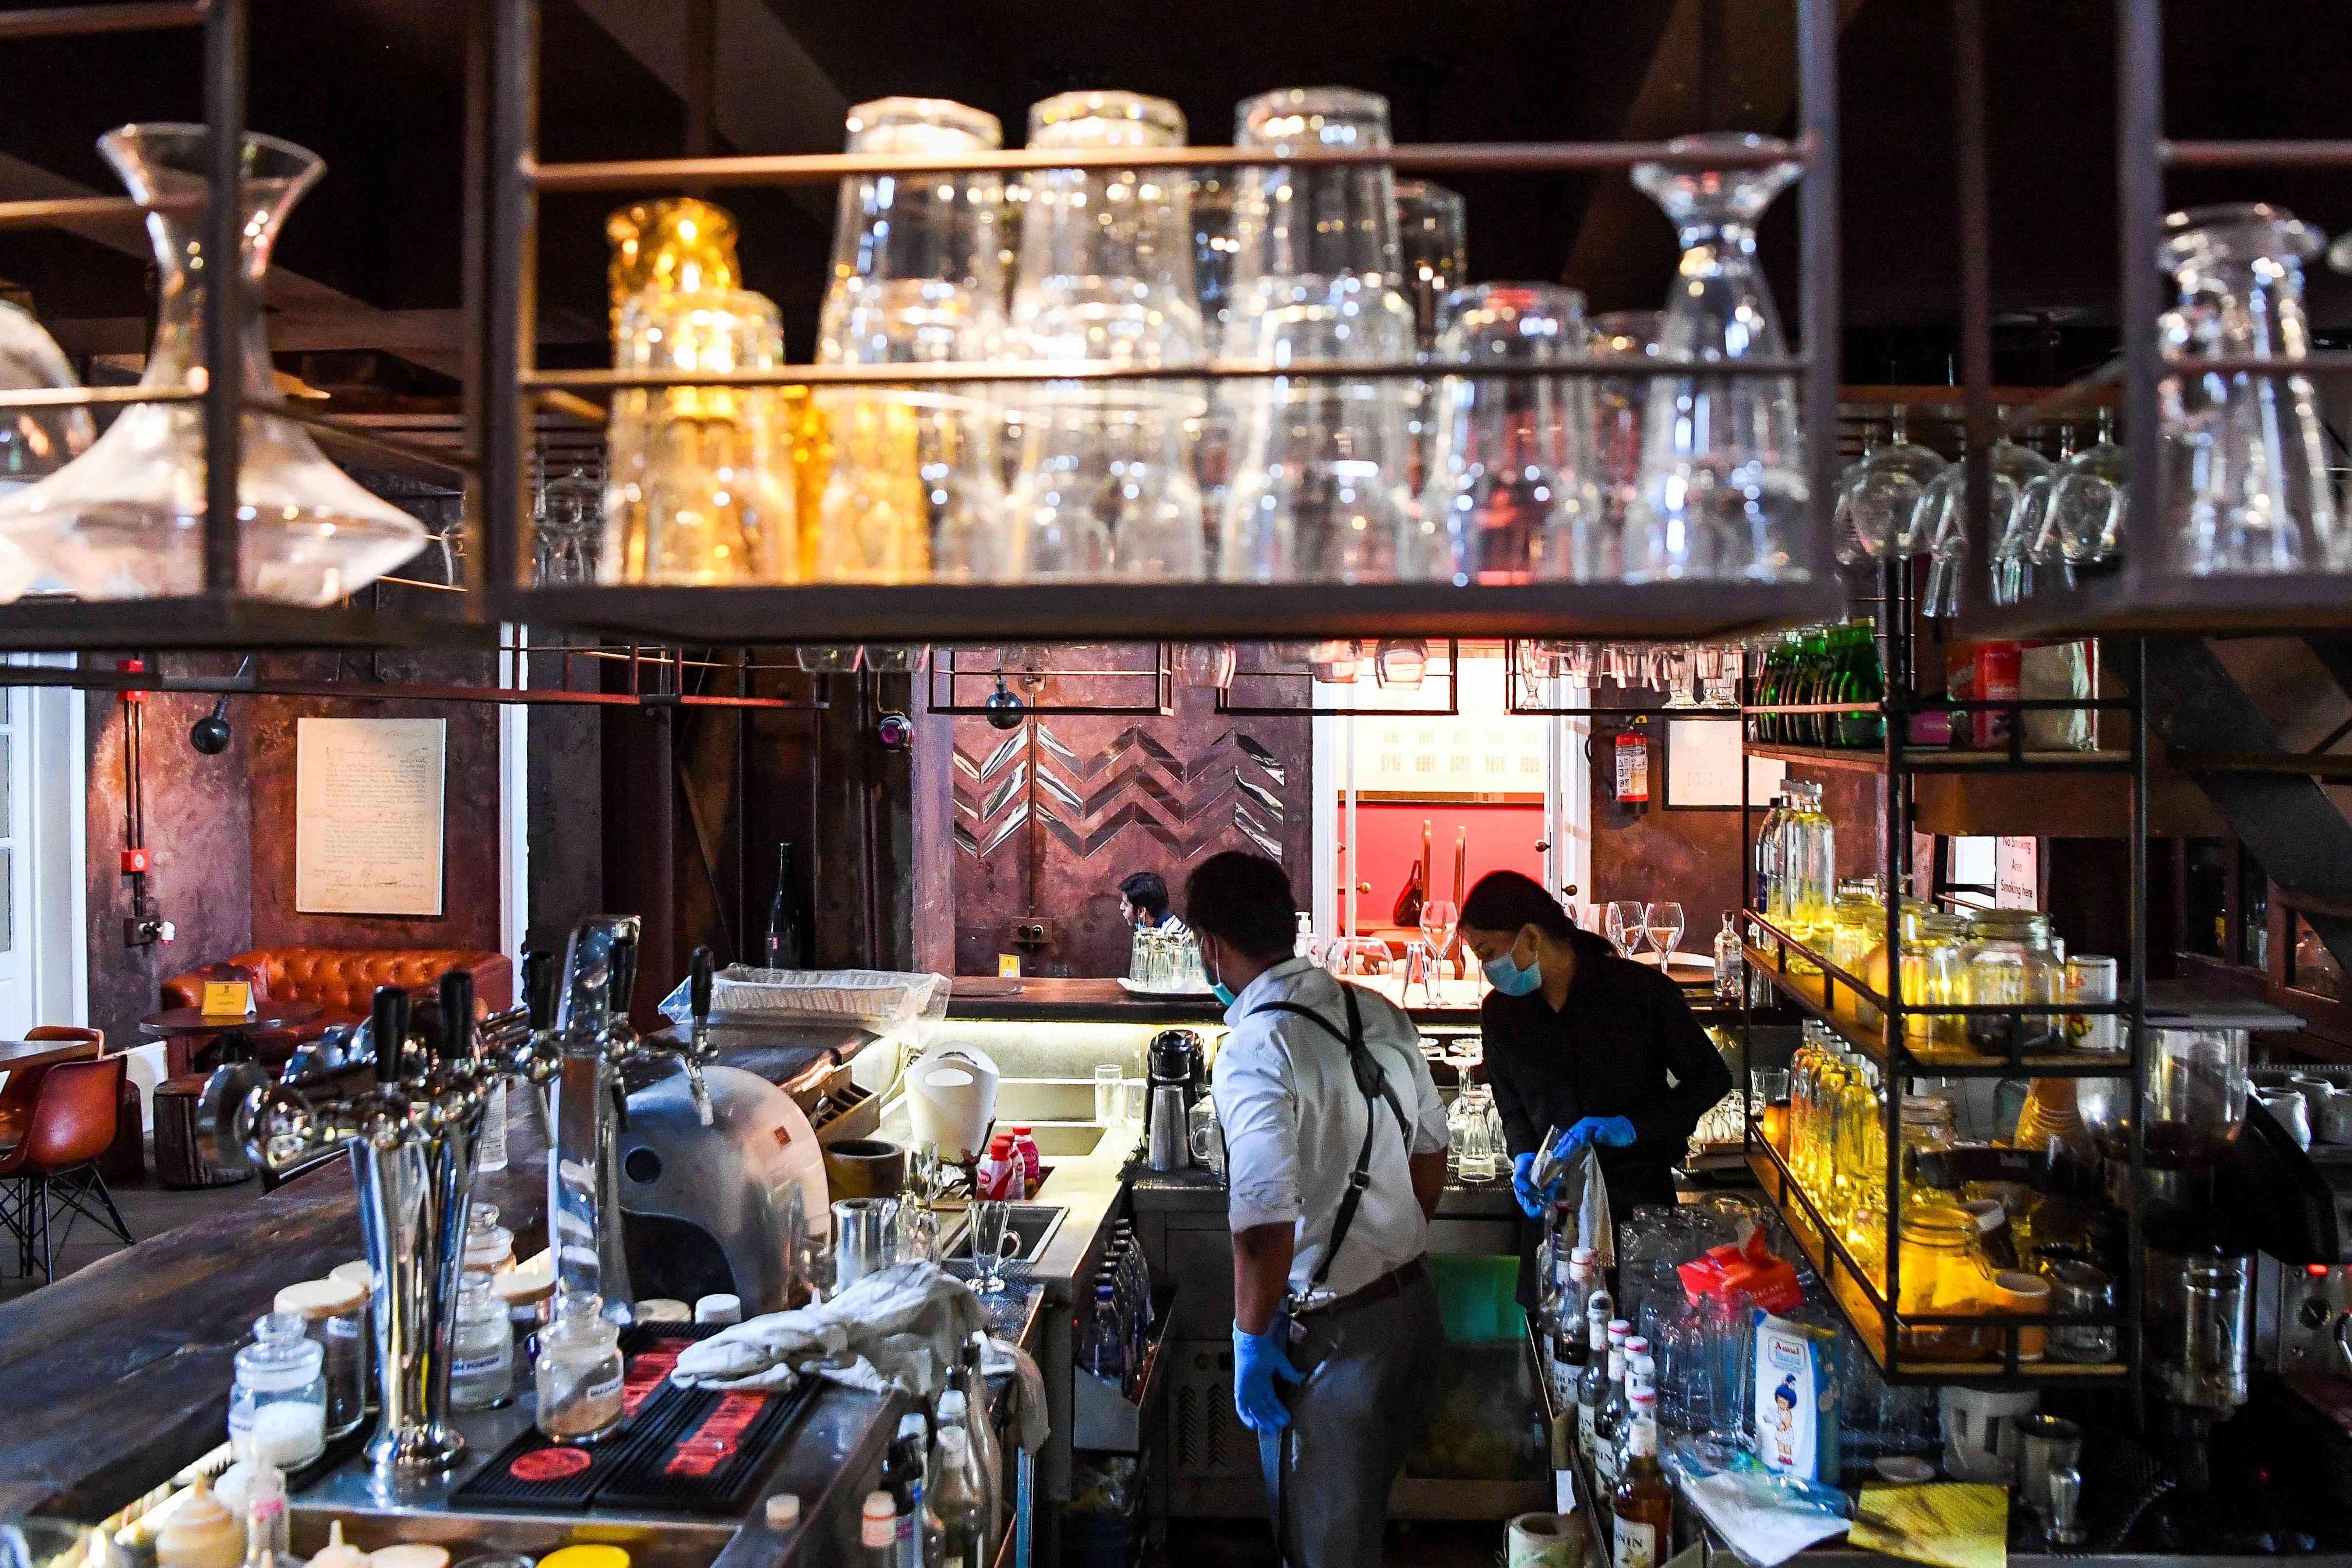 Bartender Gagan (L) and a waitstaff clean their bar in a restaurant on the eve of the scheduled reopening of liquor bars in the capital, which were ordered shut due to the Covid-19 Coronavirus pandemic, in New Delhi on September 8, 2020. - Liquor bars will reopen in the capital from September 9 on a trial basis at fifty percent seating capacity. Credit: AFP Photo